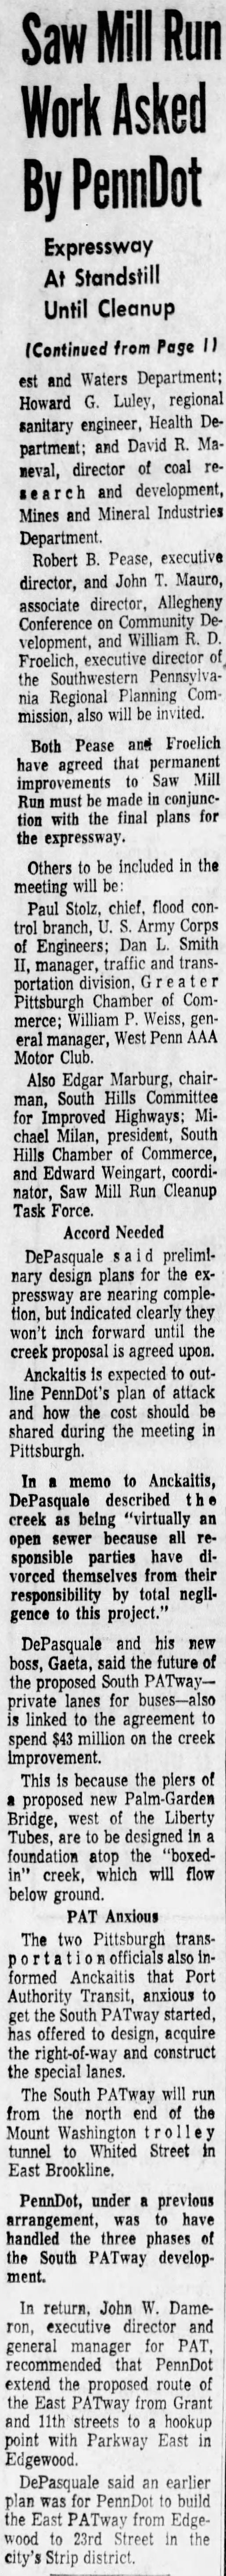 Saw Mill Run Work Asked By PennDot 7/26/1970